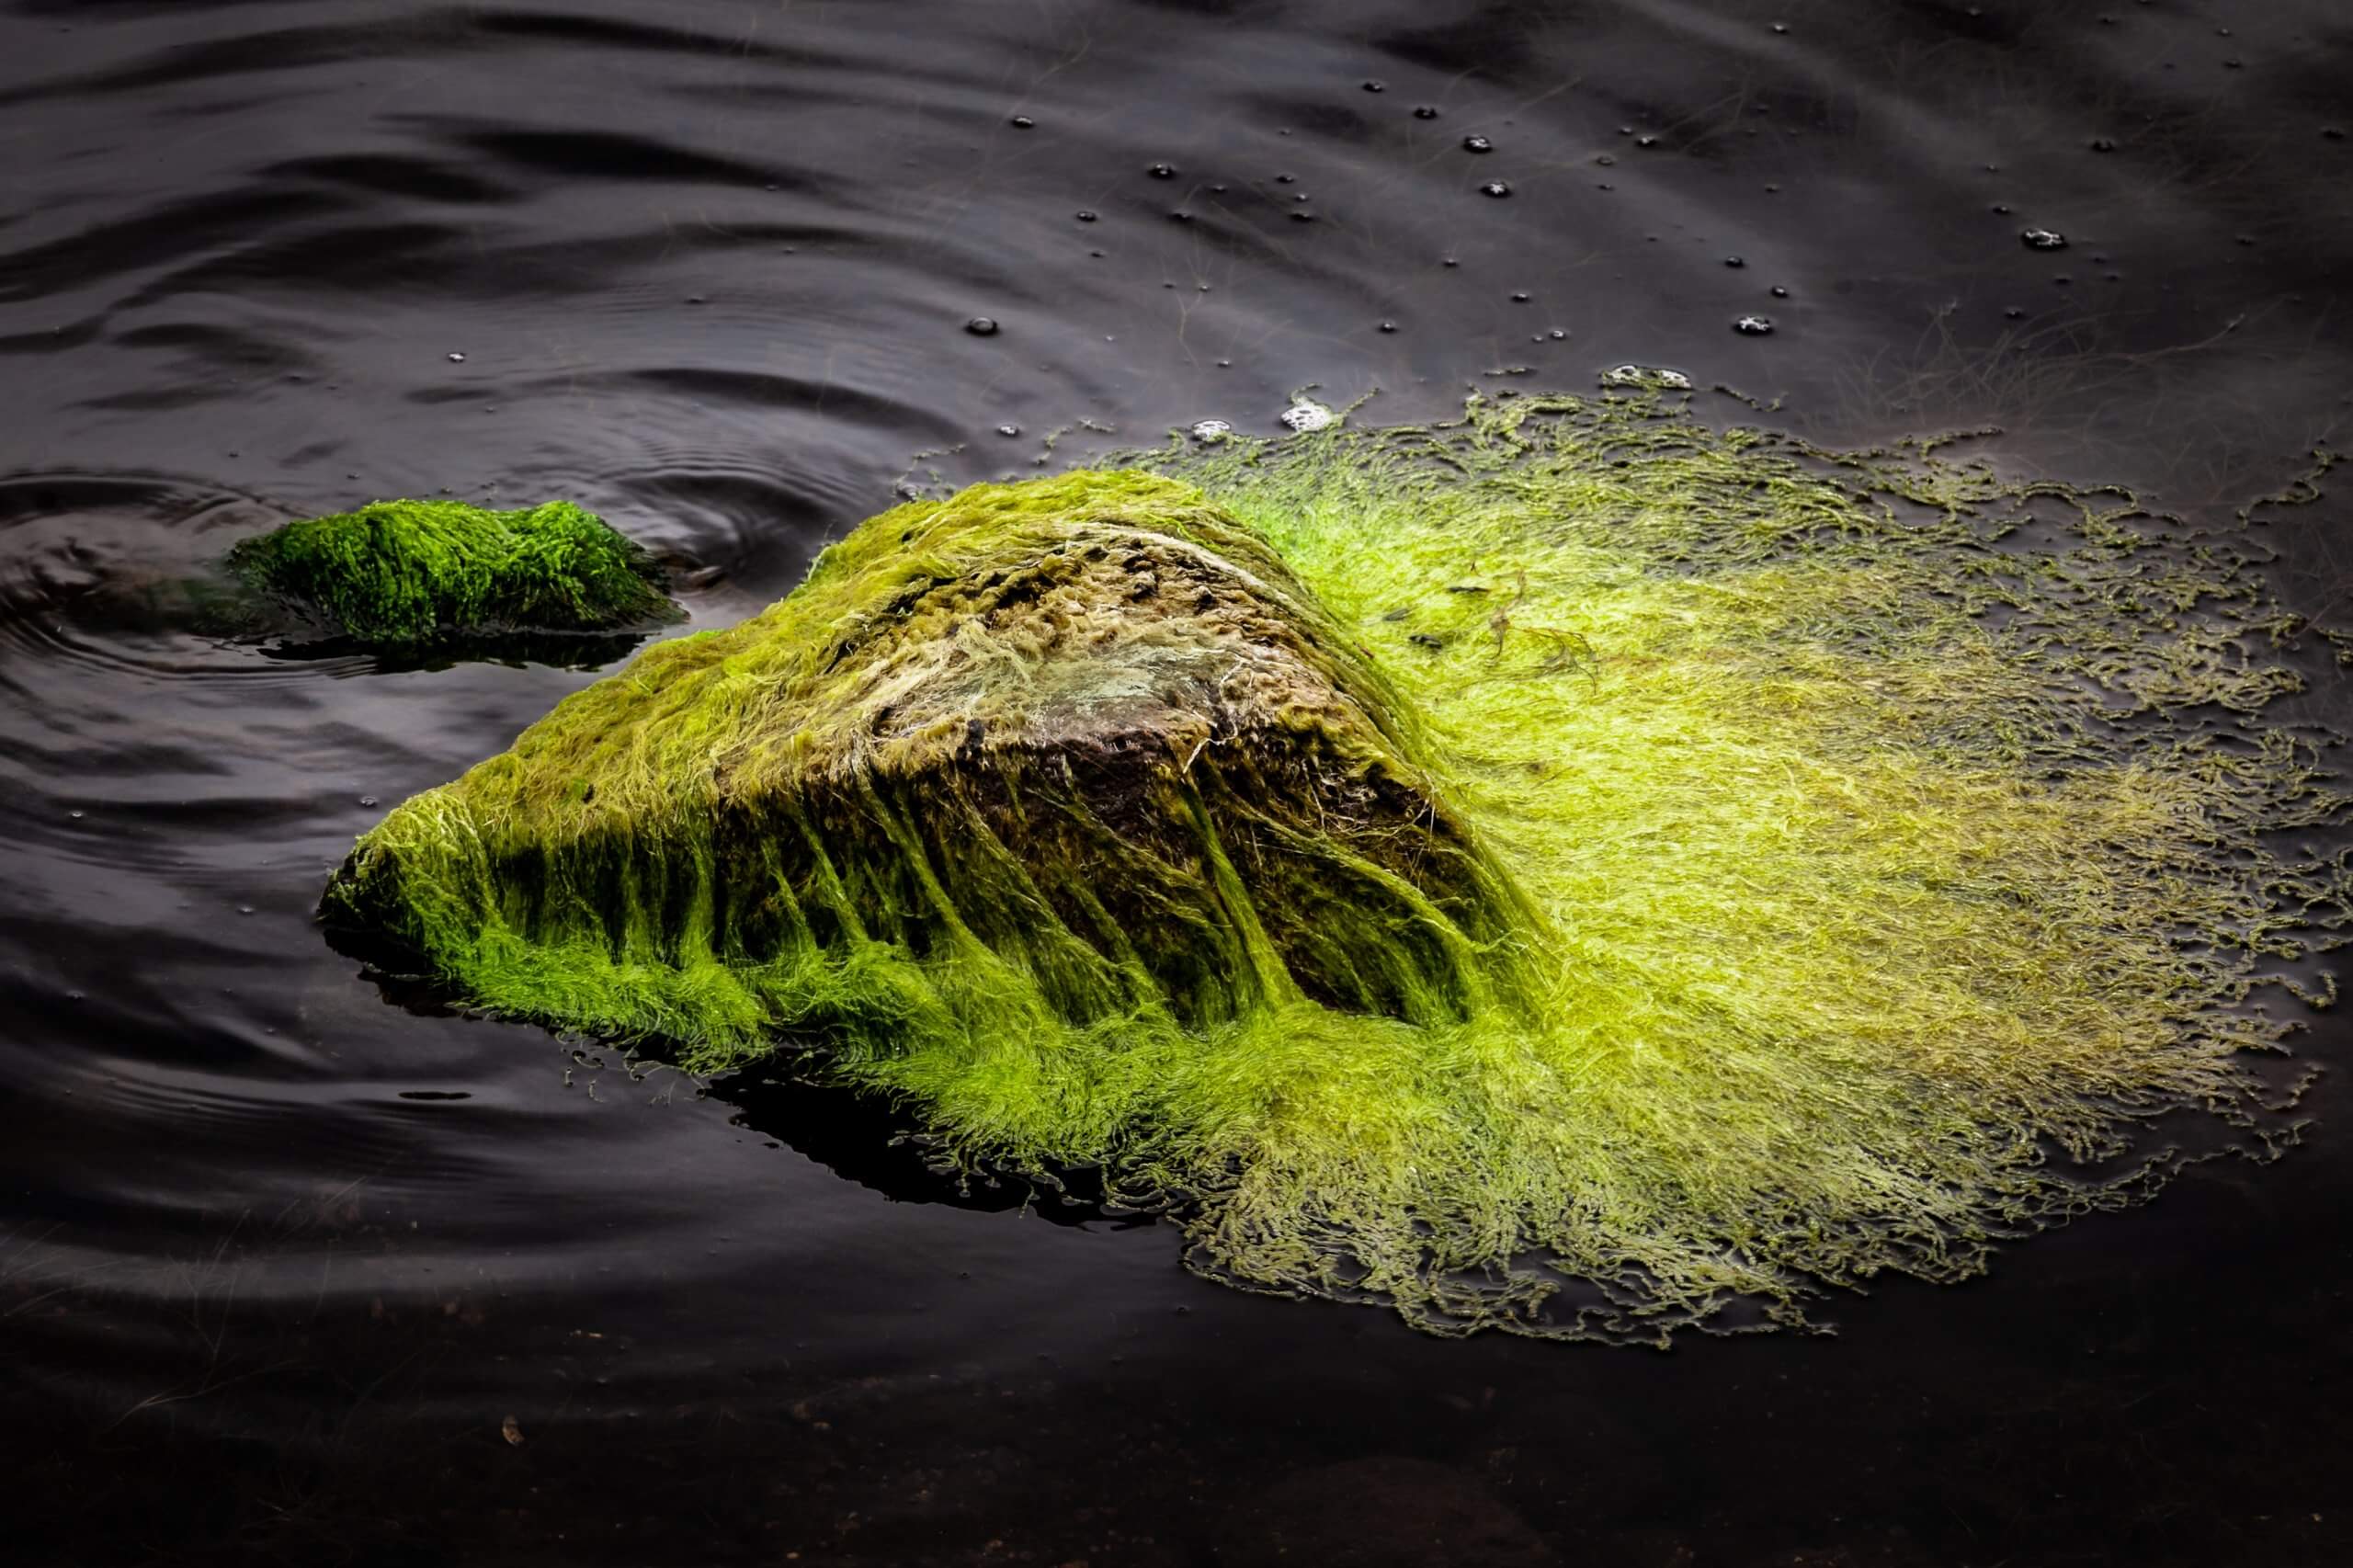 The whales "give a fin" to the photosynthesis carried out by the algae found at the top of these bodies of water. Photo by Brahm Meyer on Unsplash